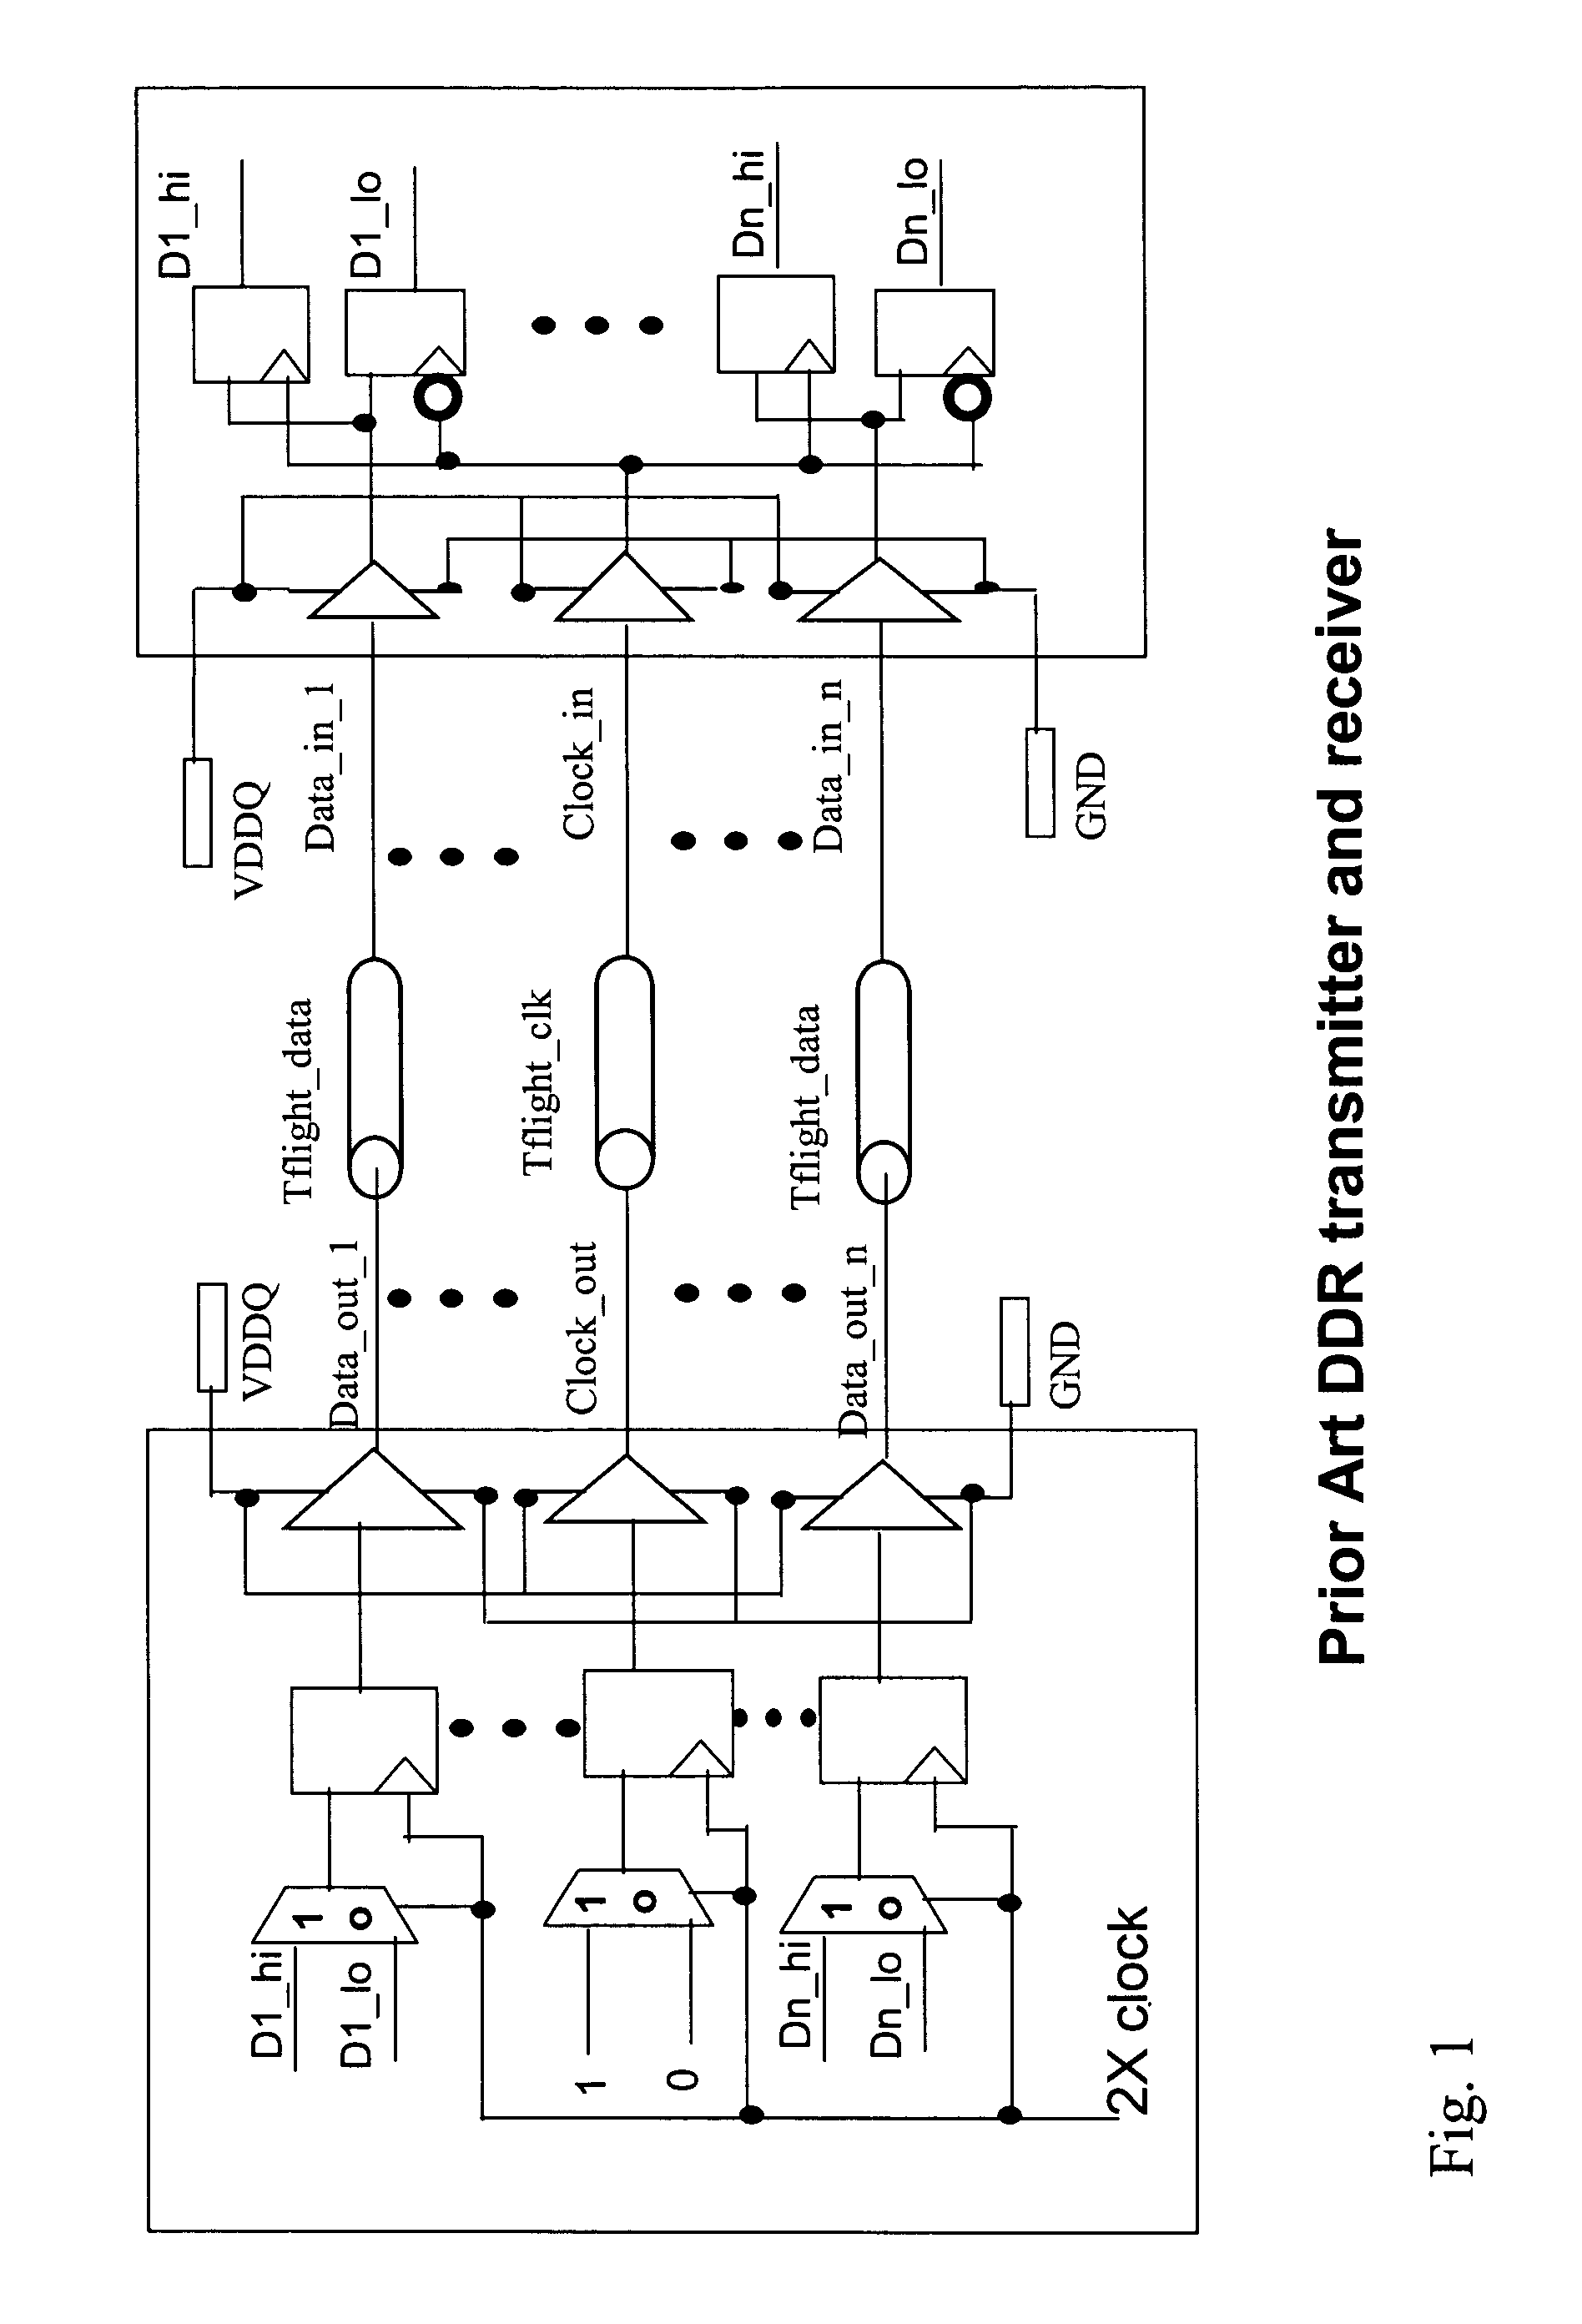 DDR interface for reducing SSO/SSI noise